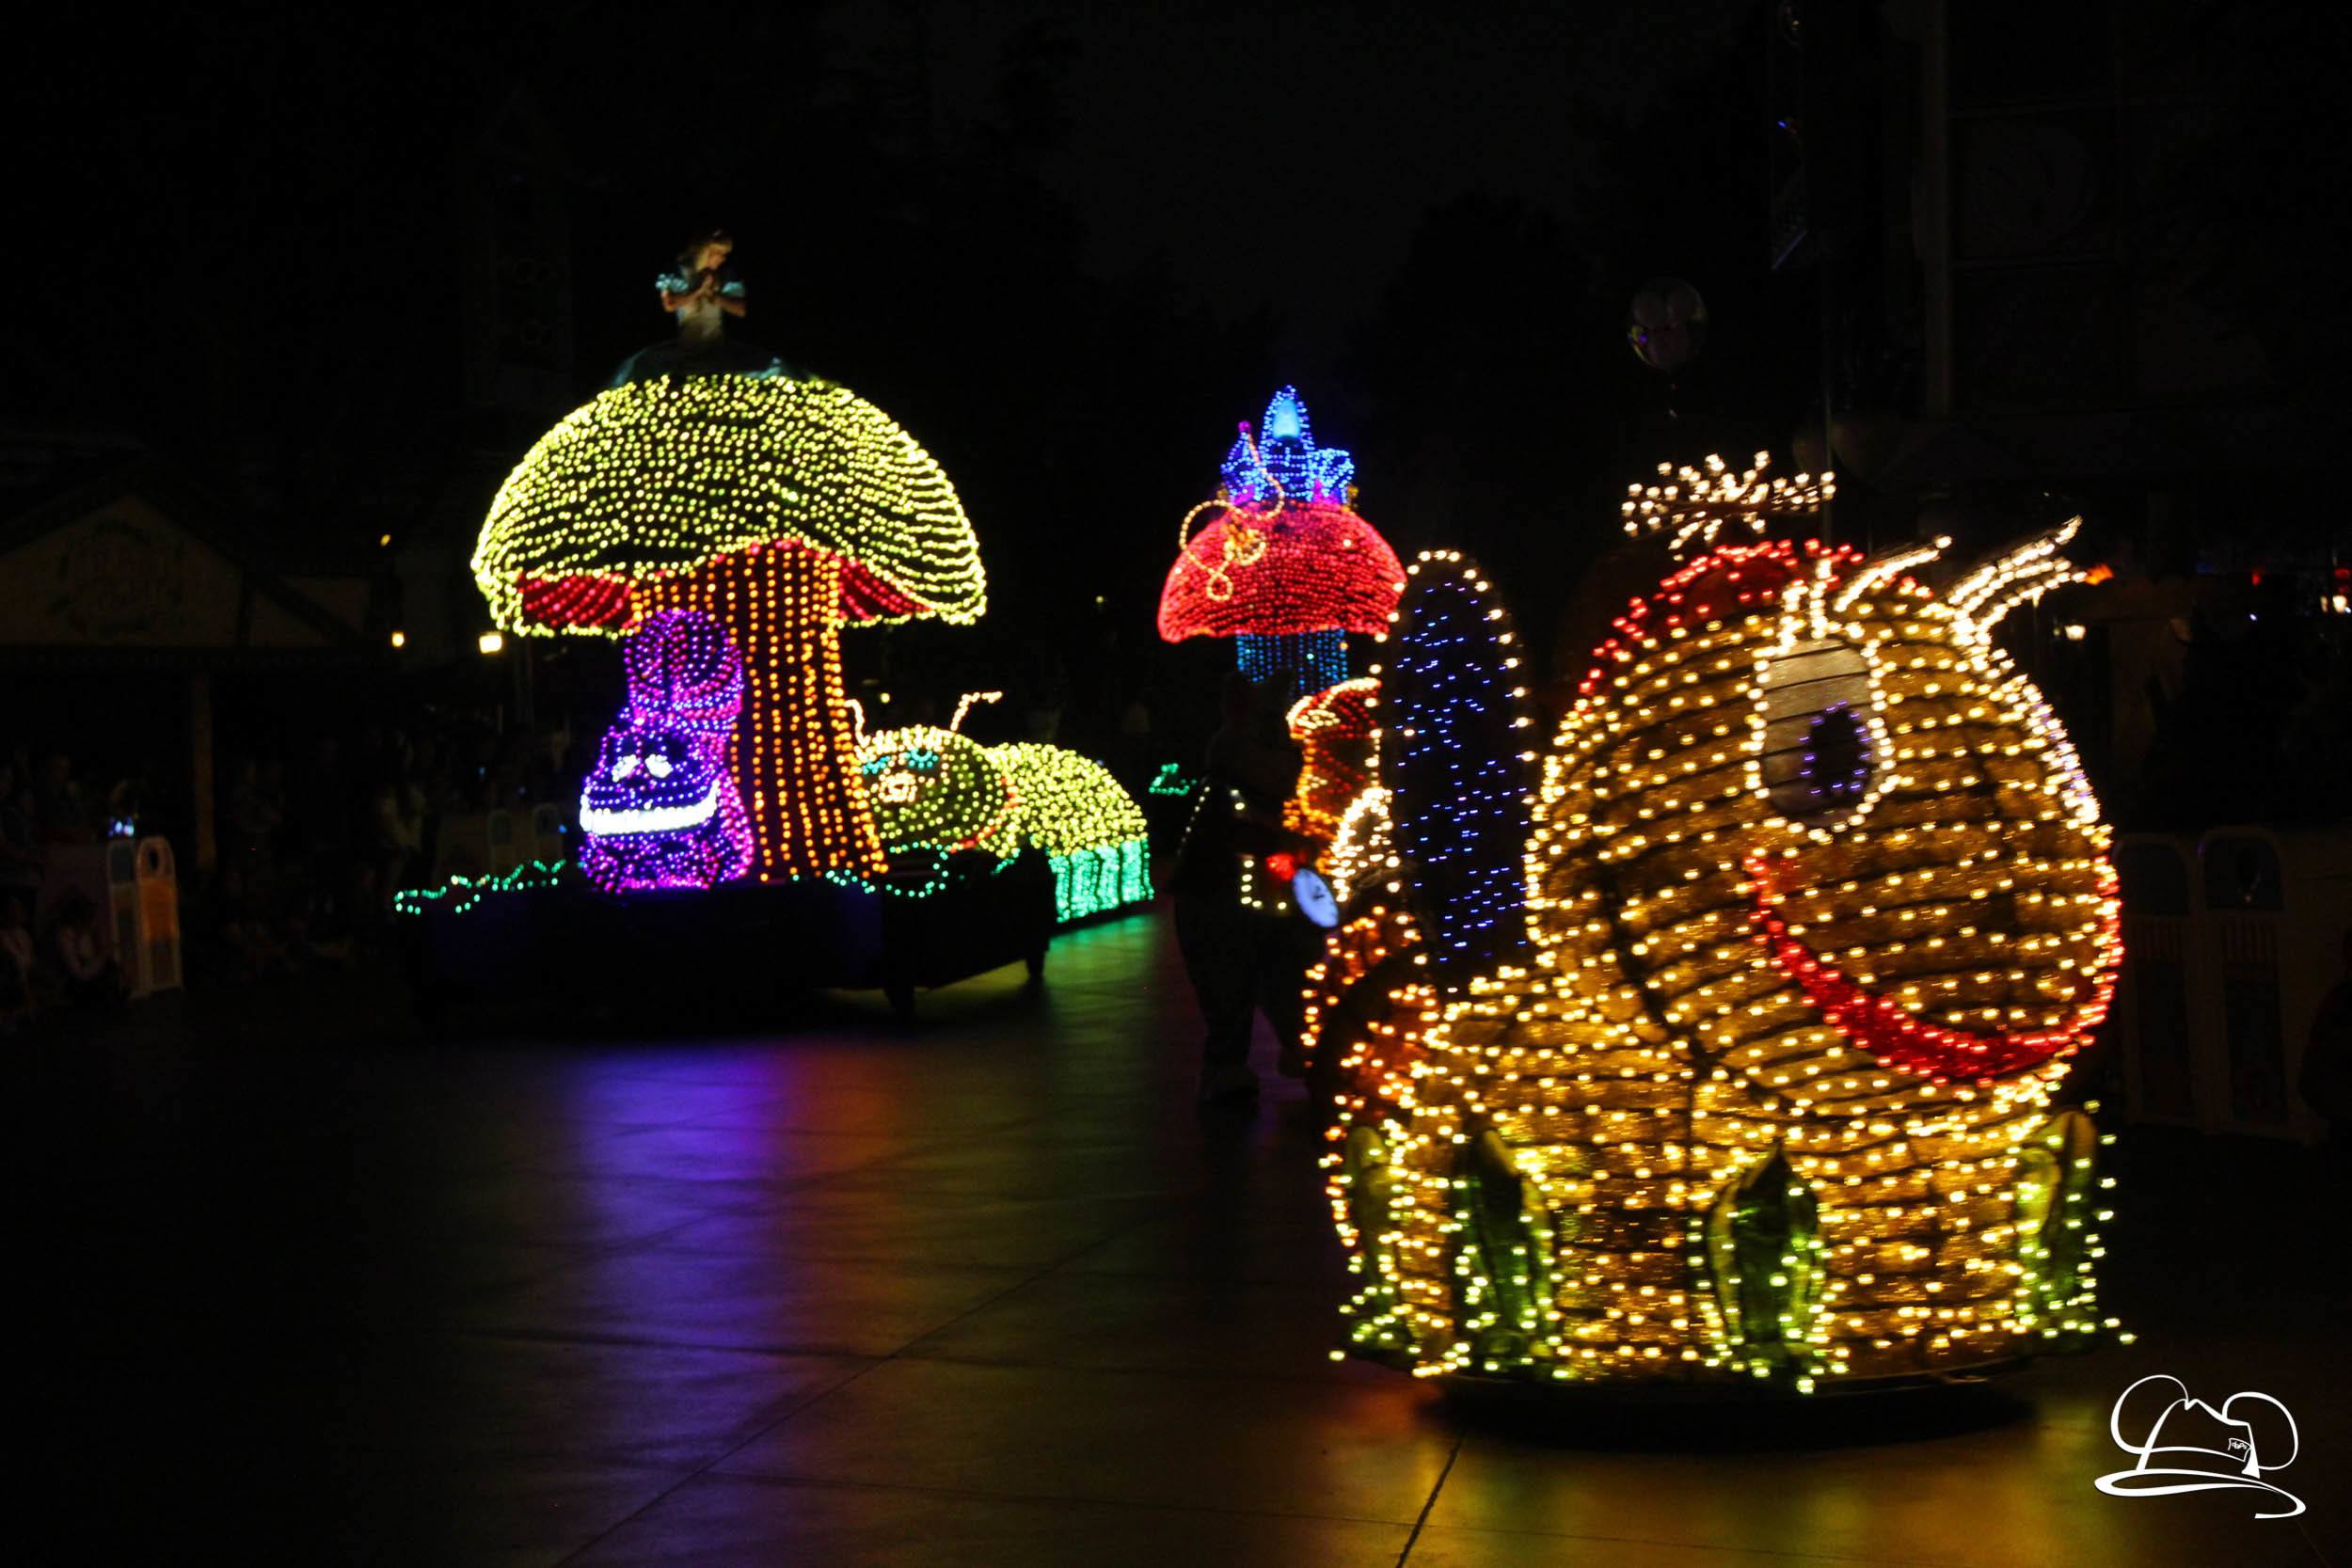 The Main Street Electrical Parade Says Goodbye and Goodnight to Disneyland